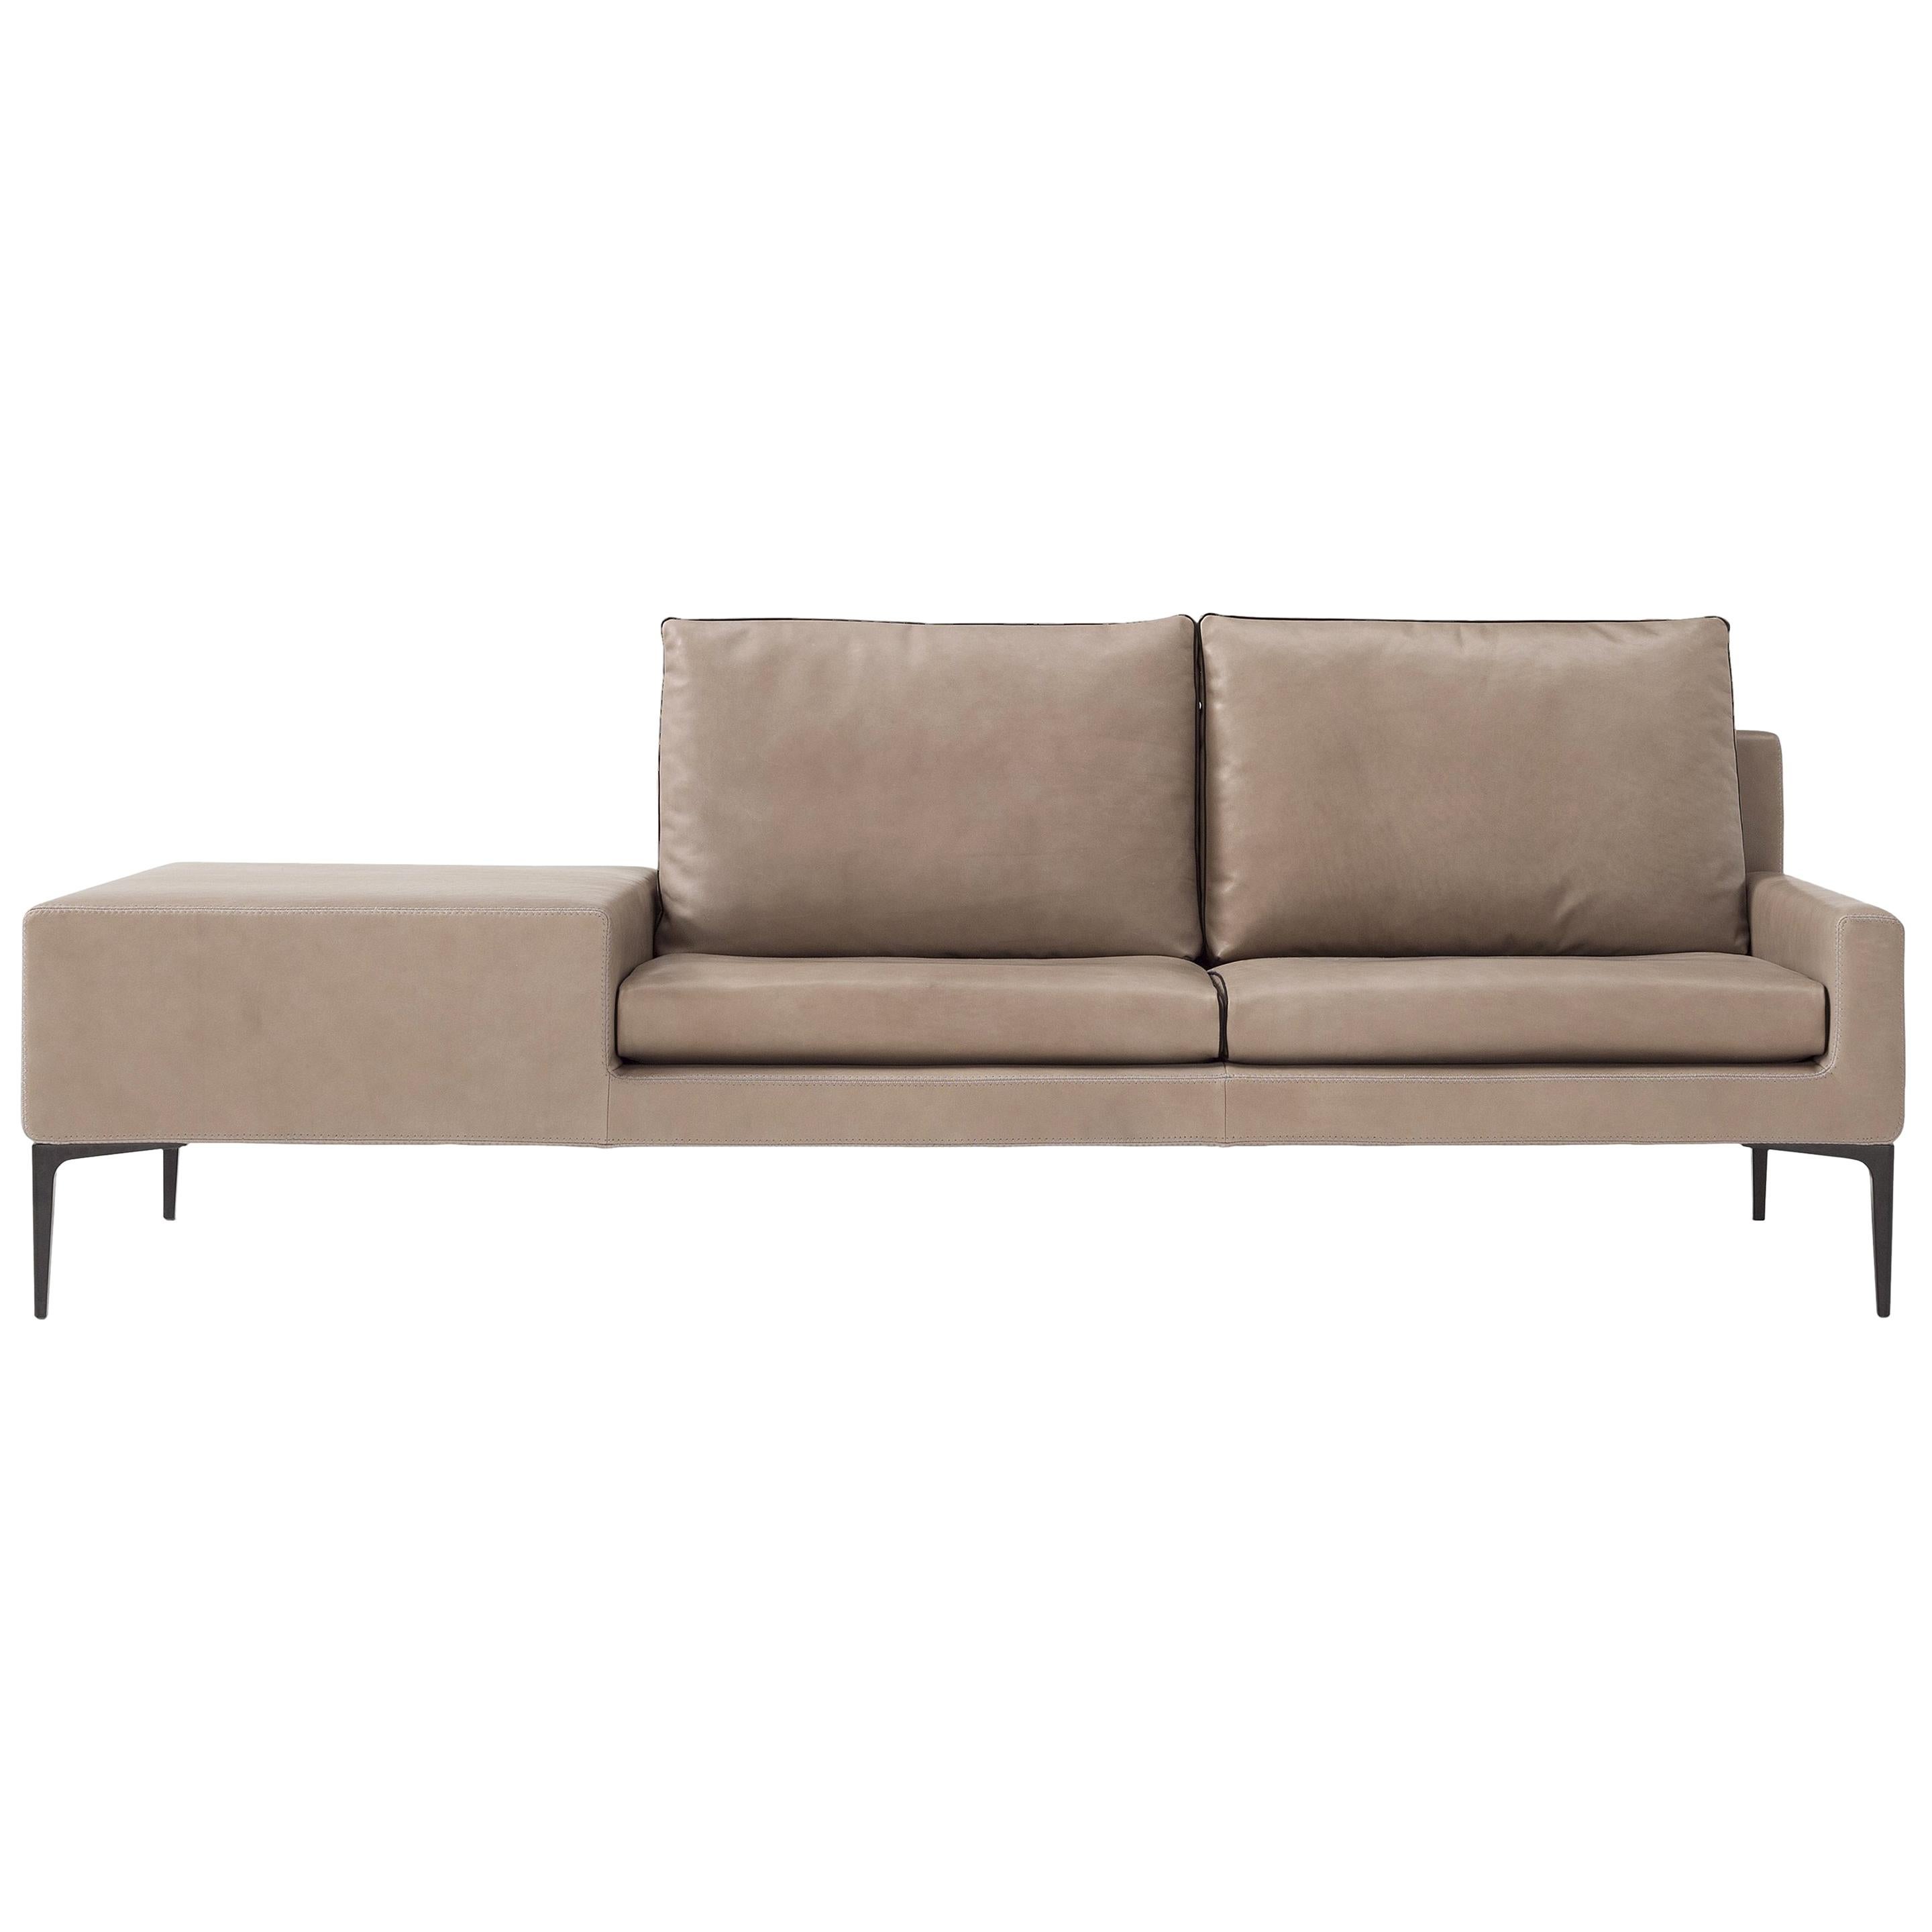 Amura 'Elsa' Sofa in Taupe Leather with Connected Table by Luca Scachetti